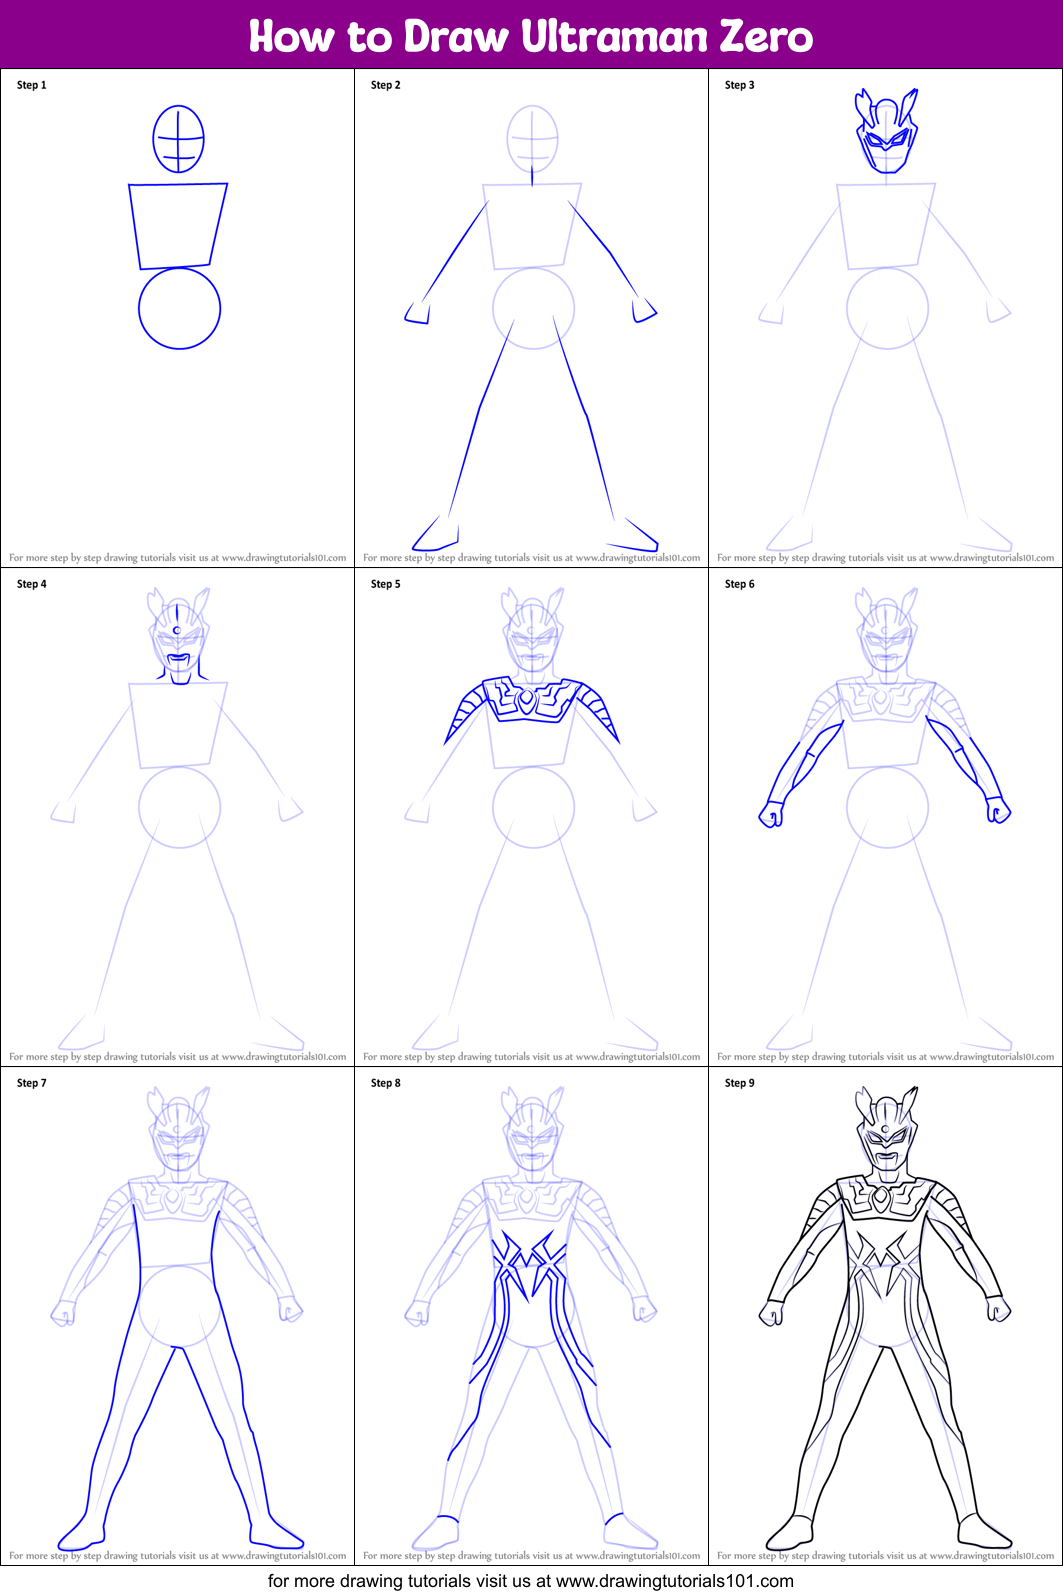 How to Draw Ultraman Zero printable step by step drawing sheet